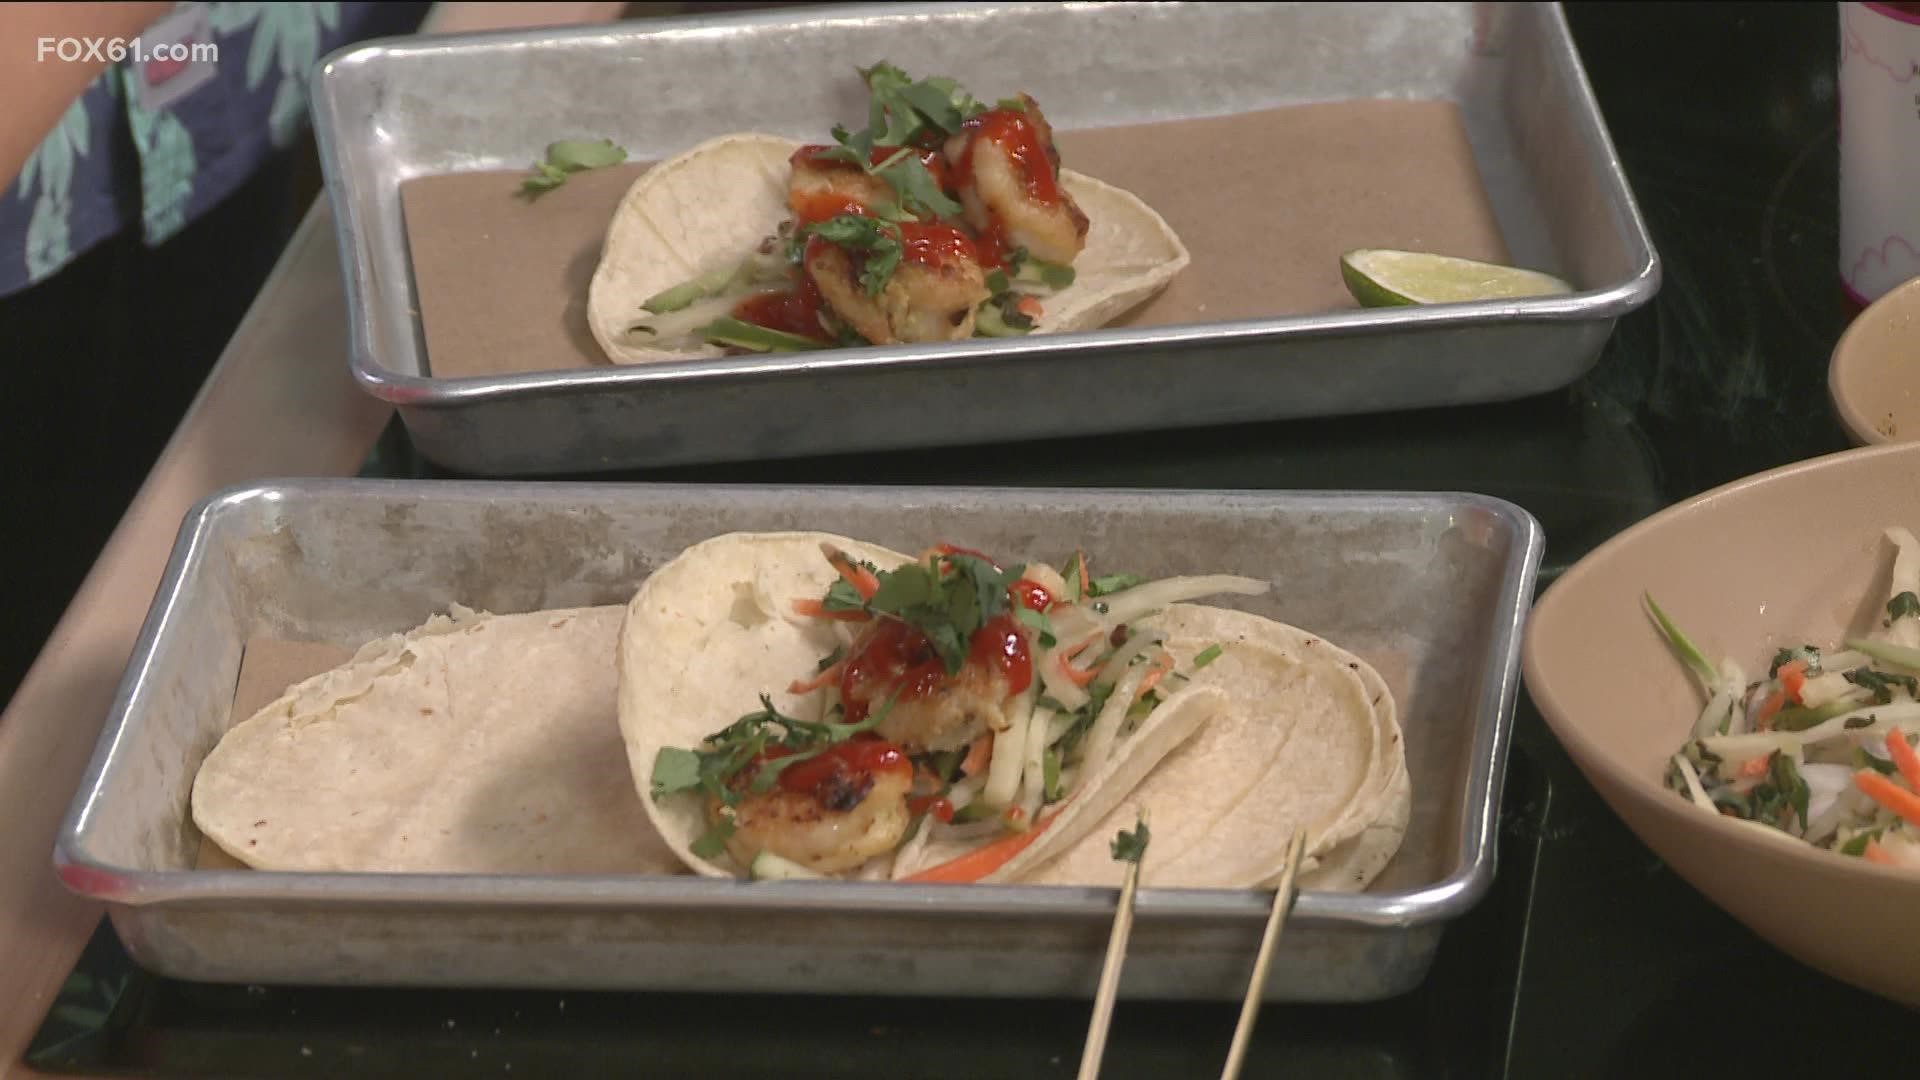 Ahead of Cinco de Mayor on Thursday, West Hartford's bartaco restaurant is sharing one of their delicious taco recipes!